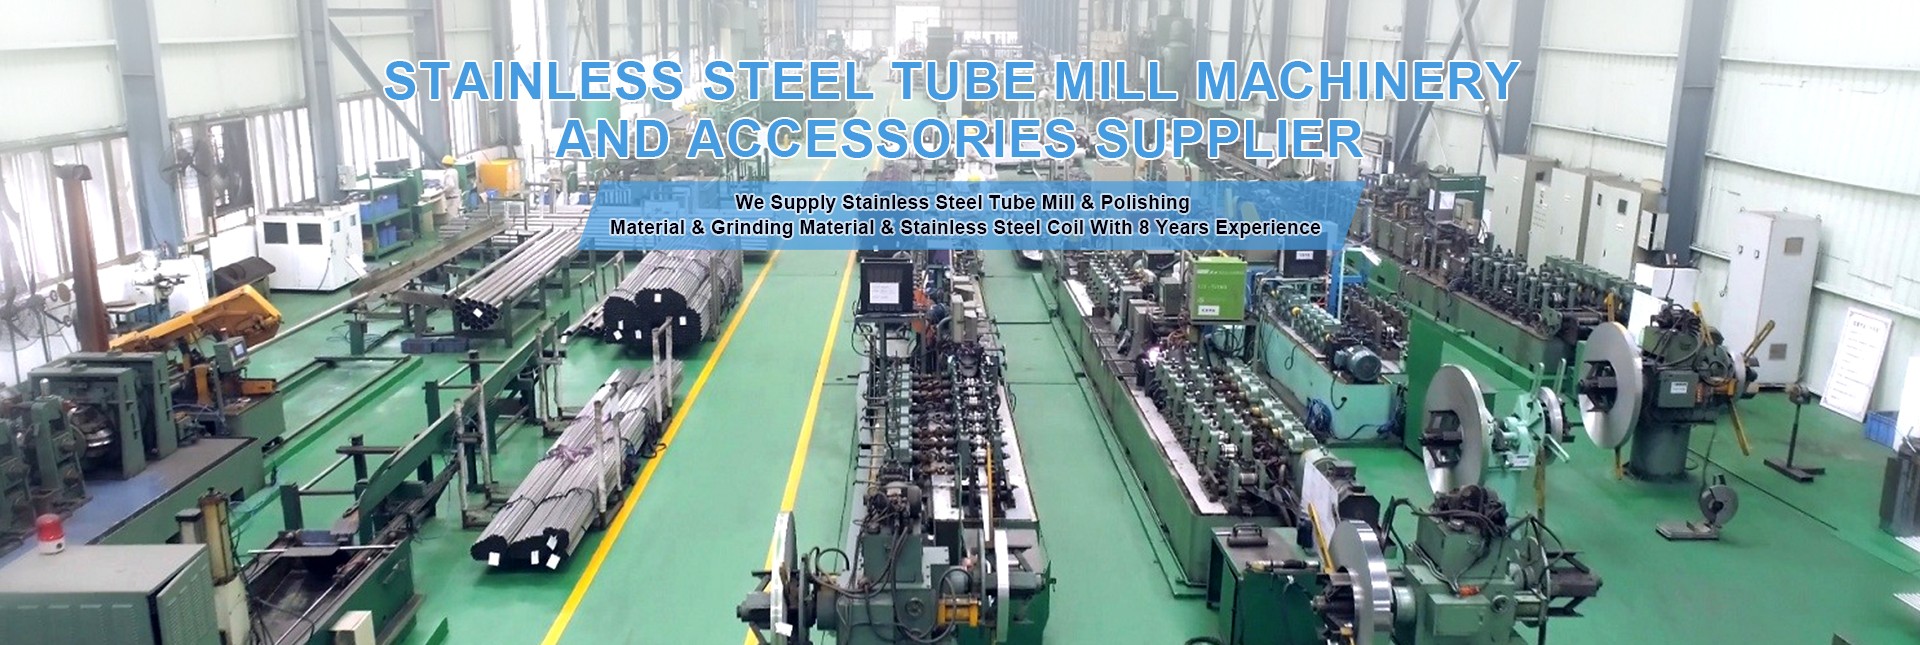 STAINLESS STEEL TUBE MILL